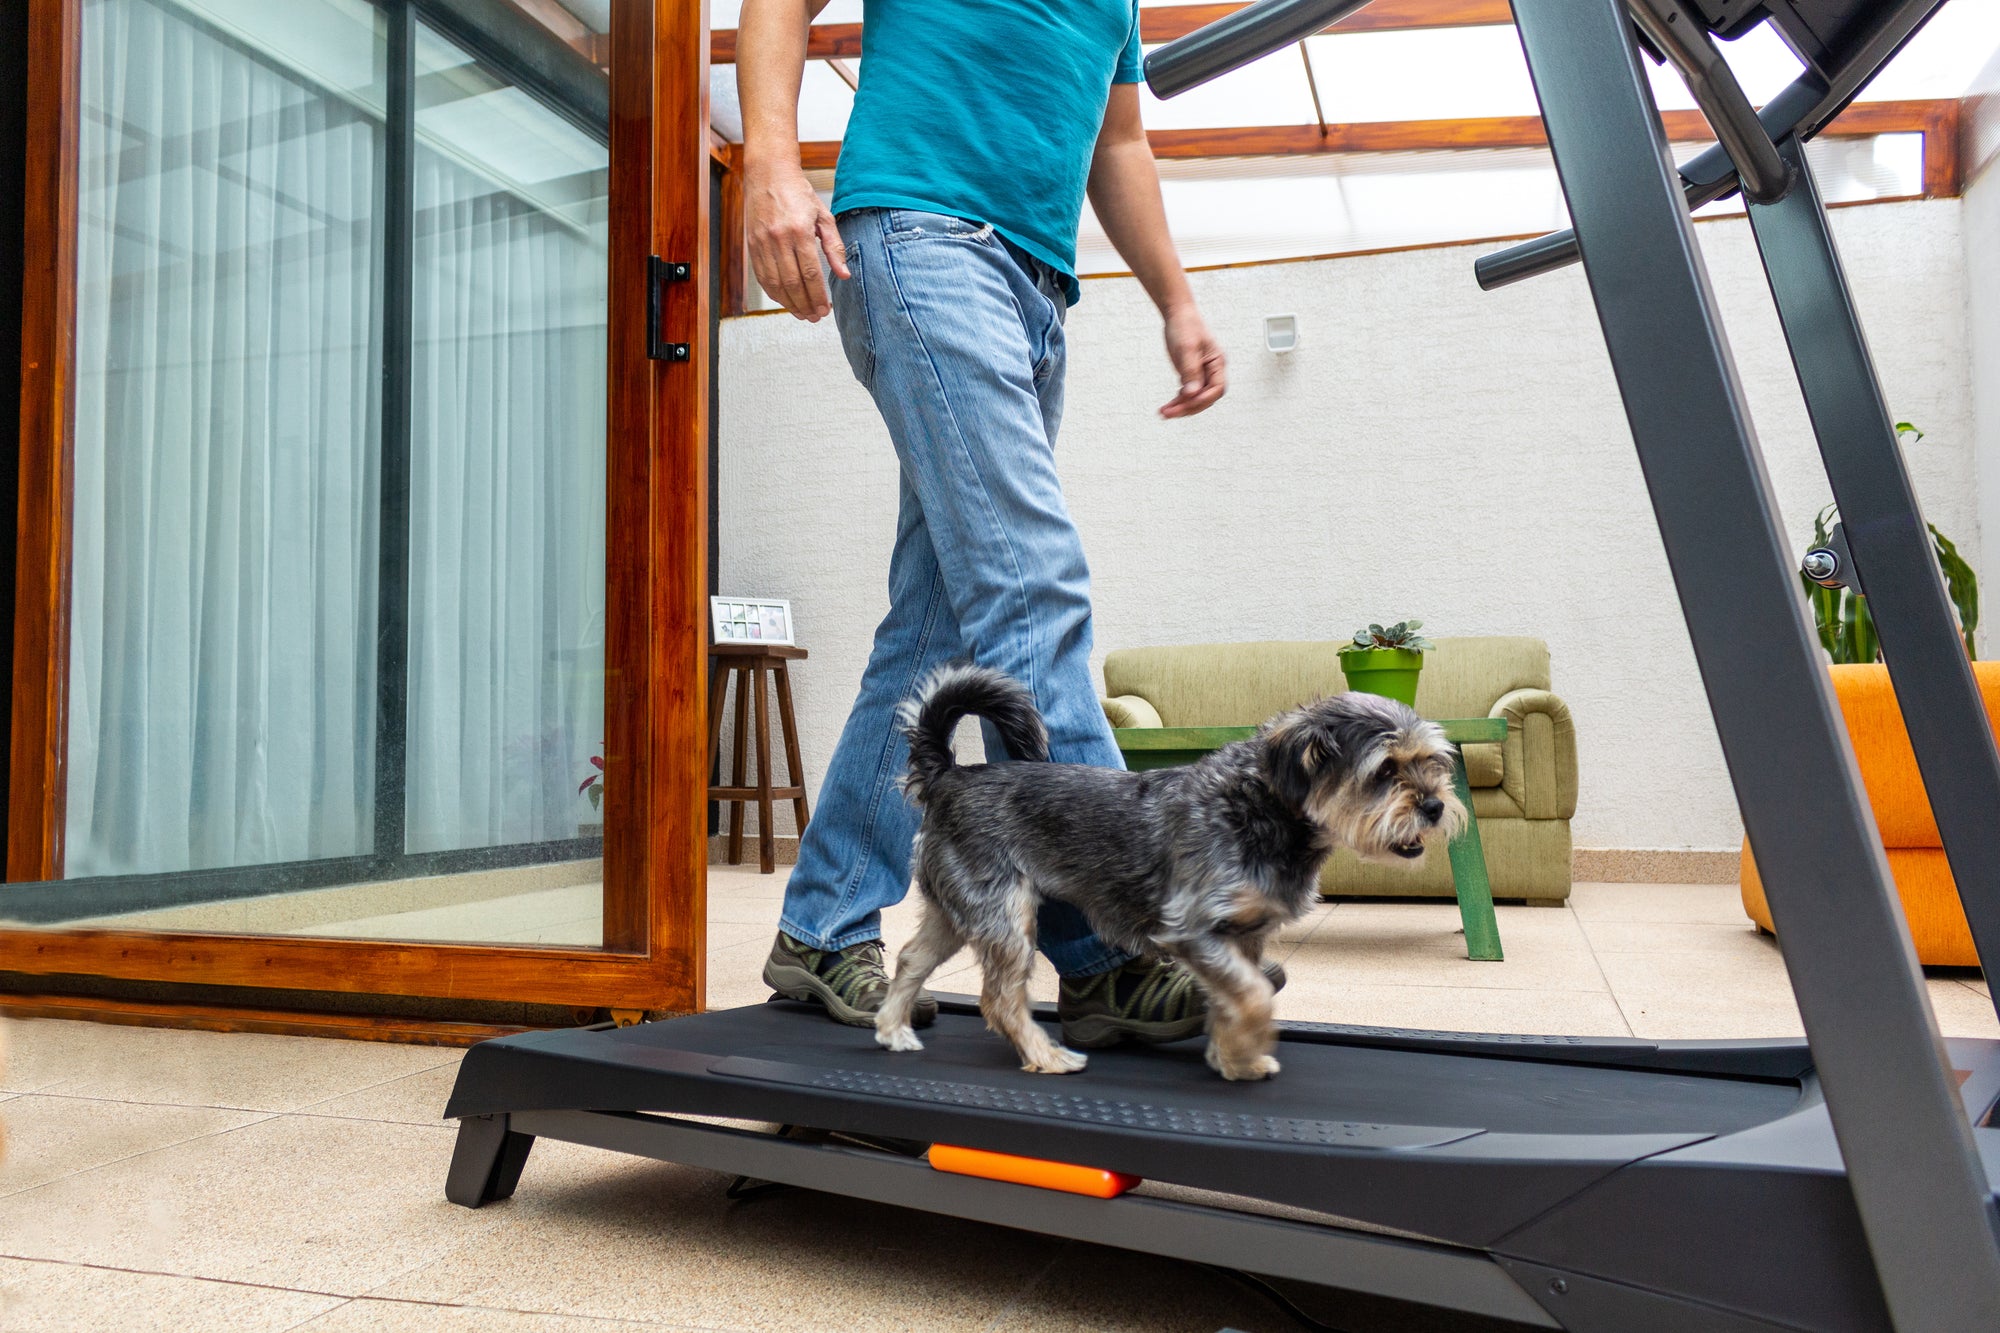 small gray dog walking on treadmill while human stands nearby 